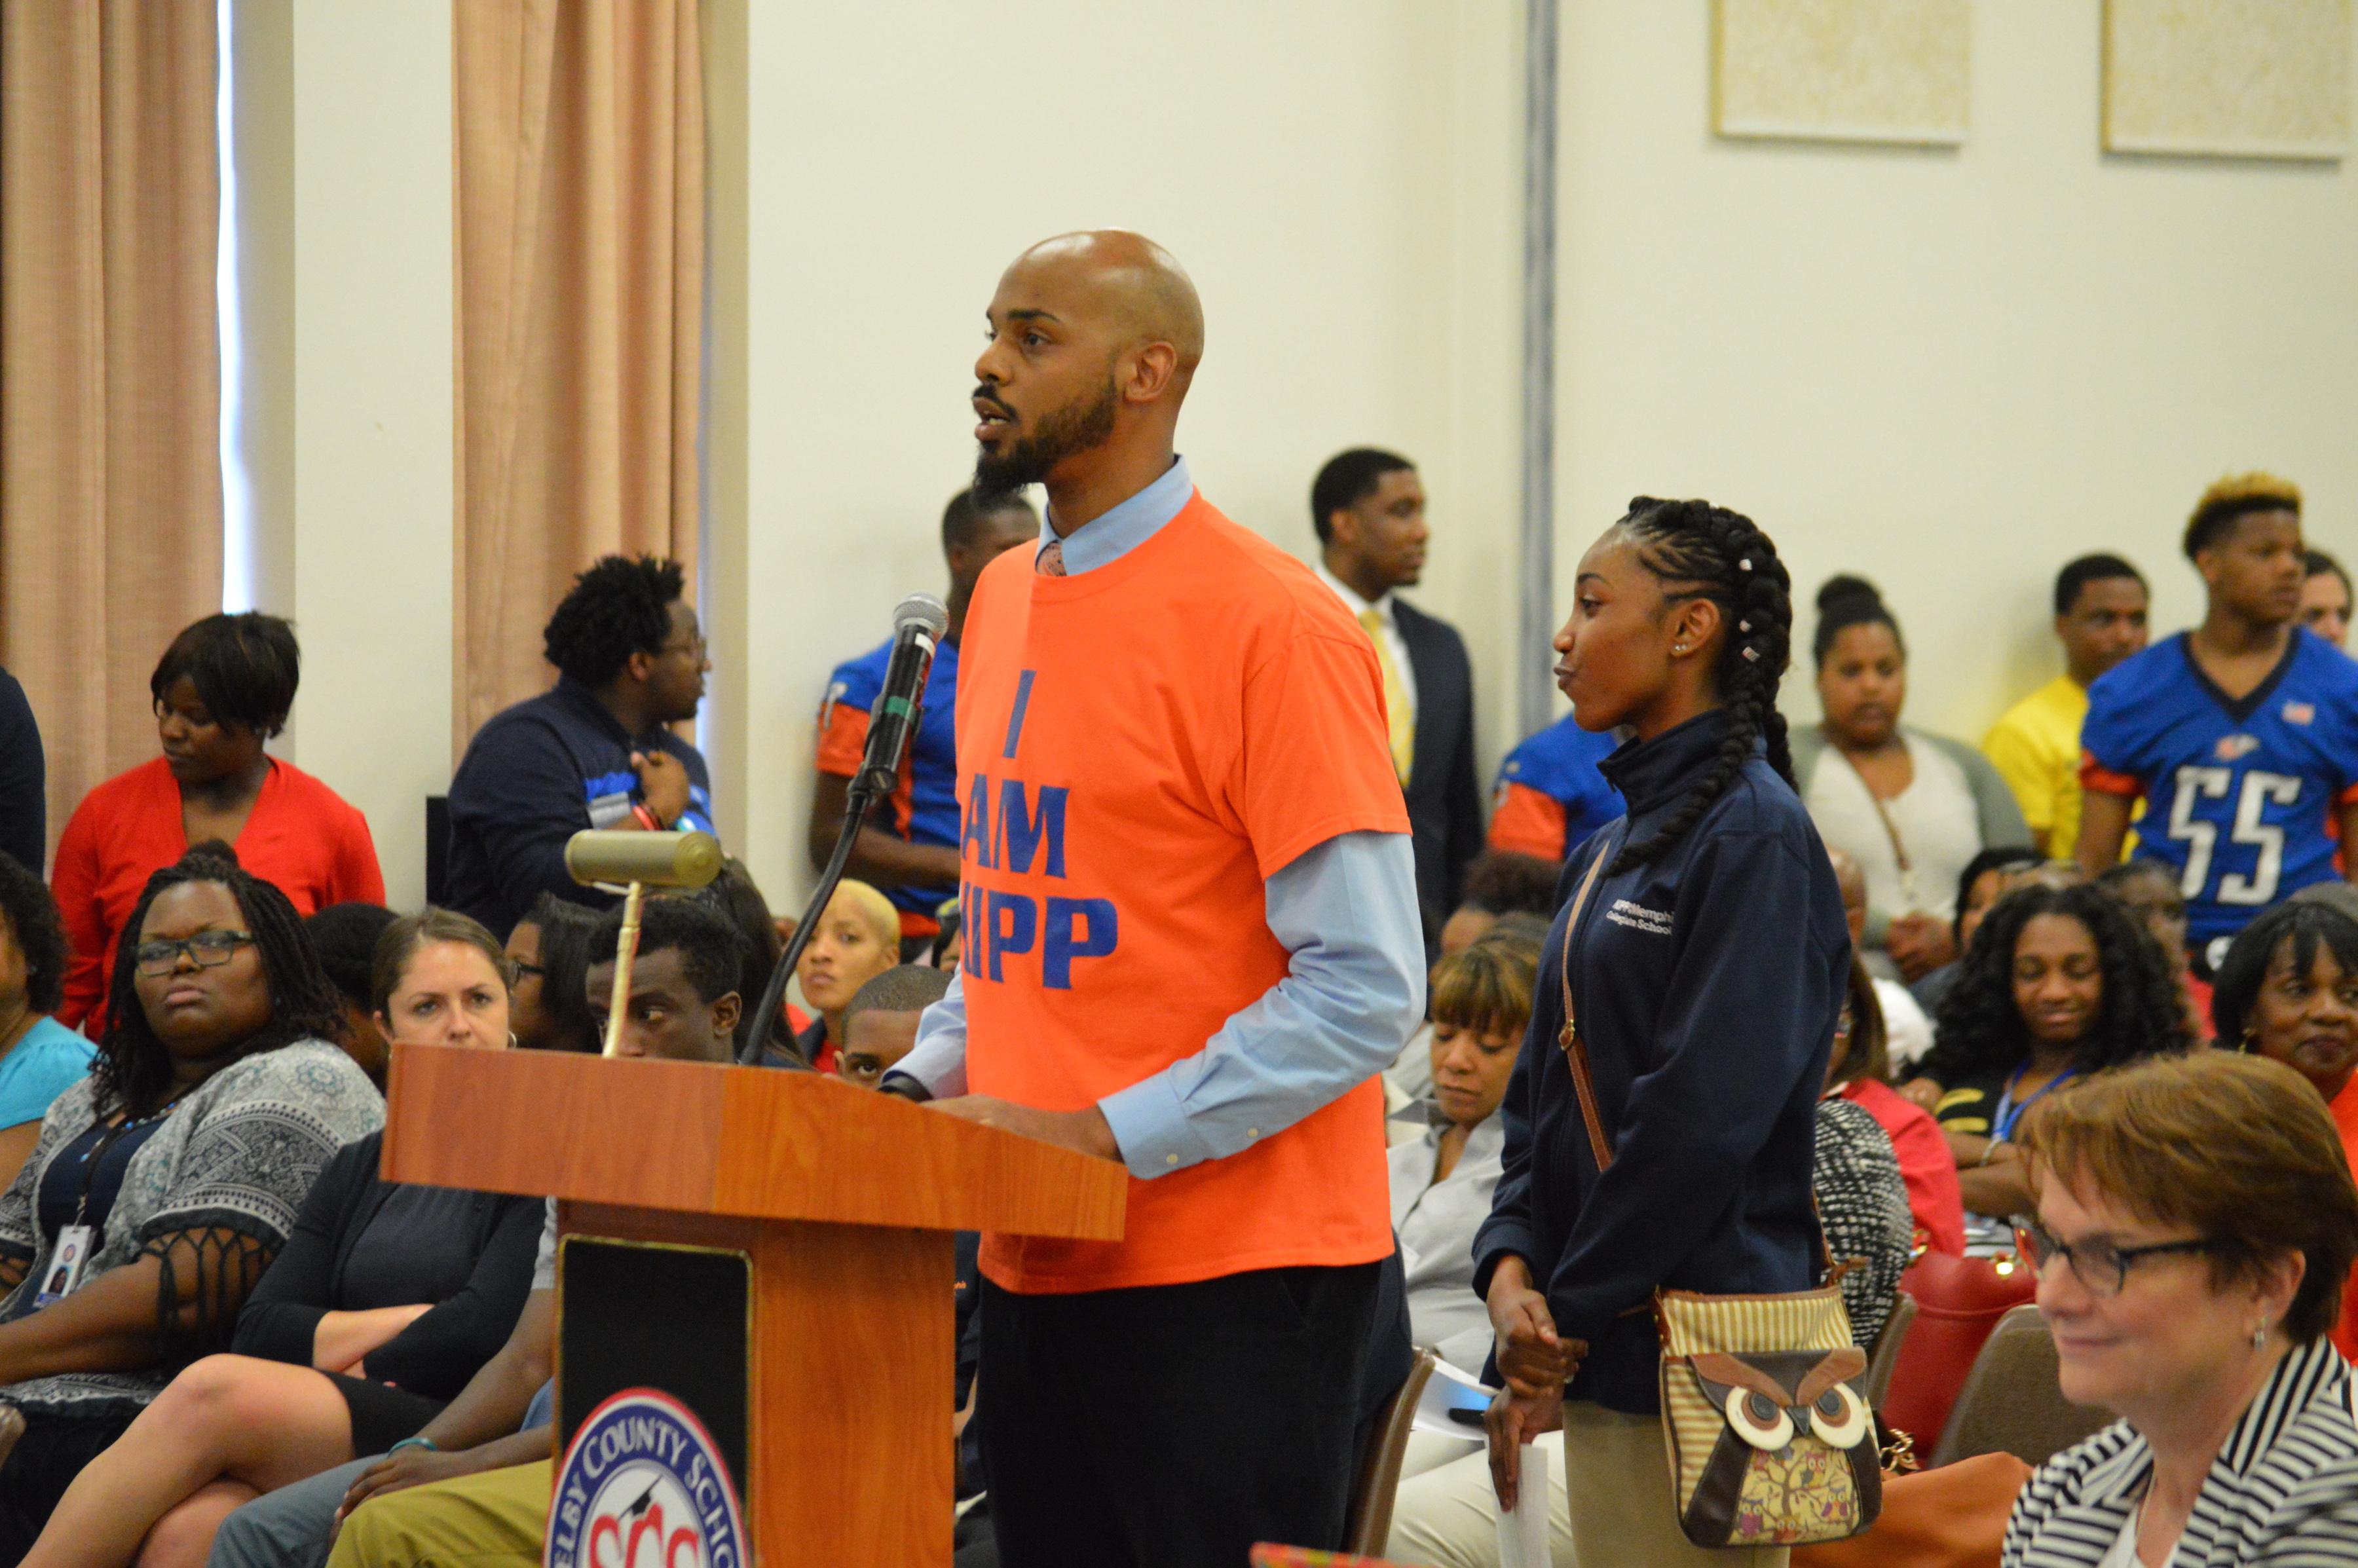 Tim Pruitt, assistant principal of KIPP Memphis Collegiate Middle School, urges members of Shelby County's school board during an April 26 meeting not to close his charter school.